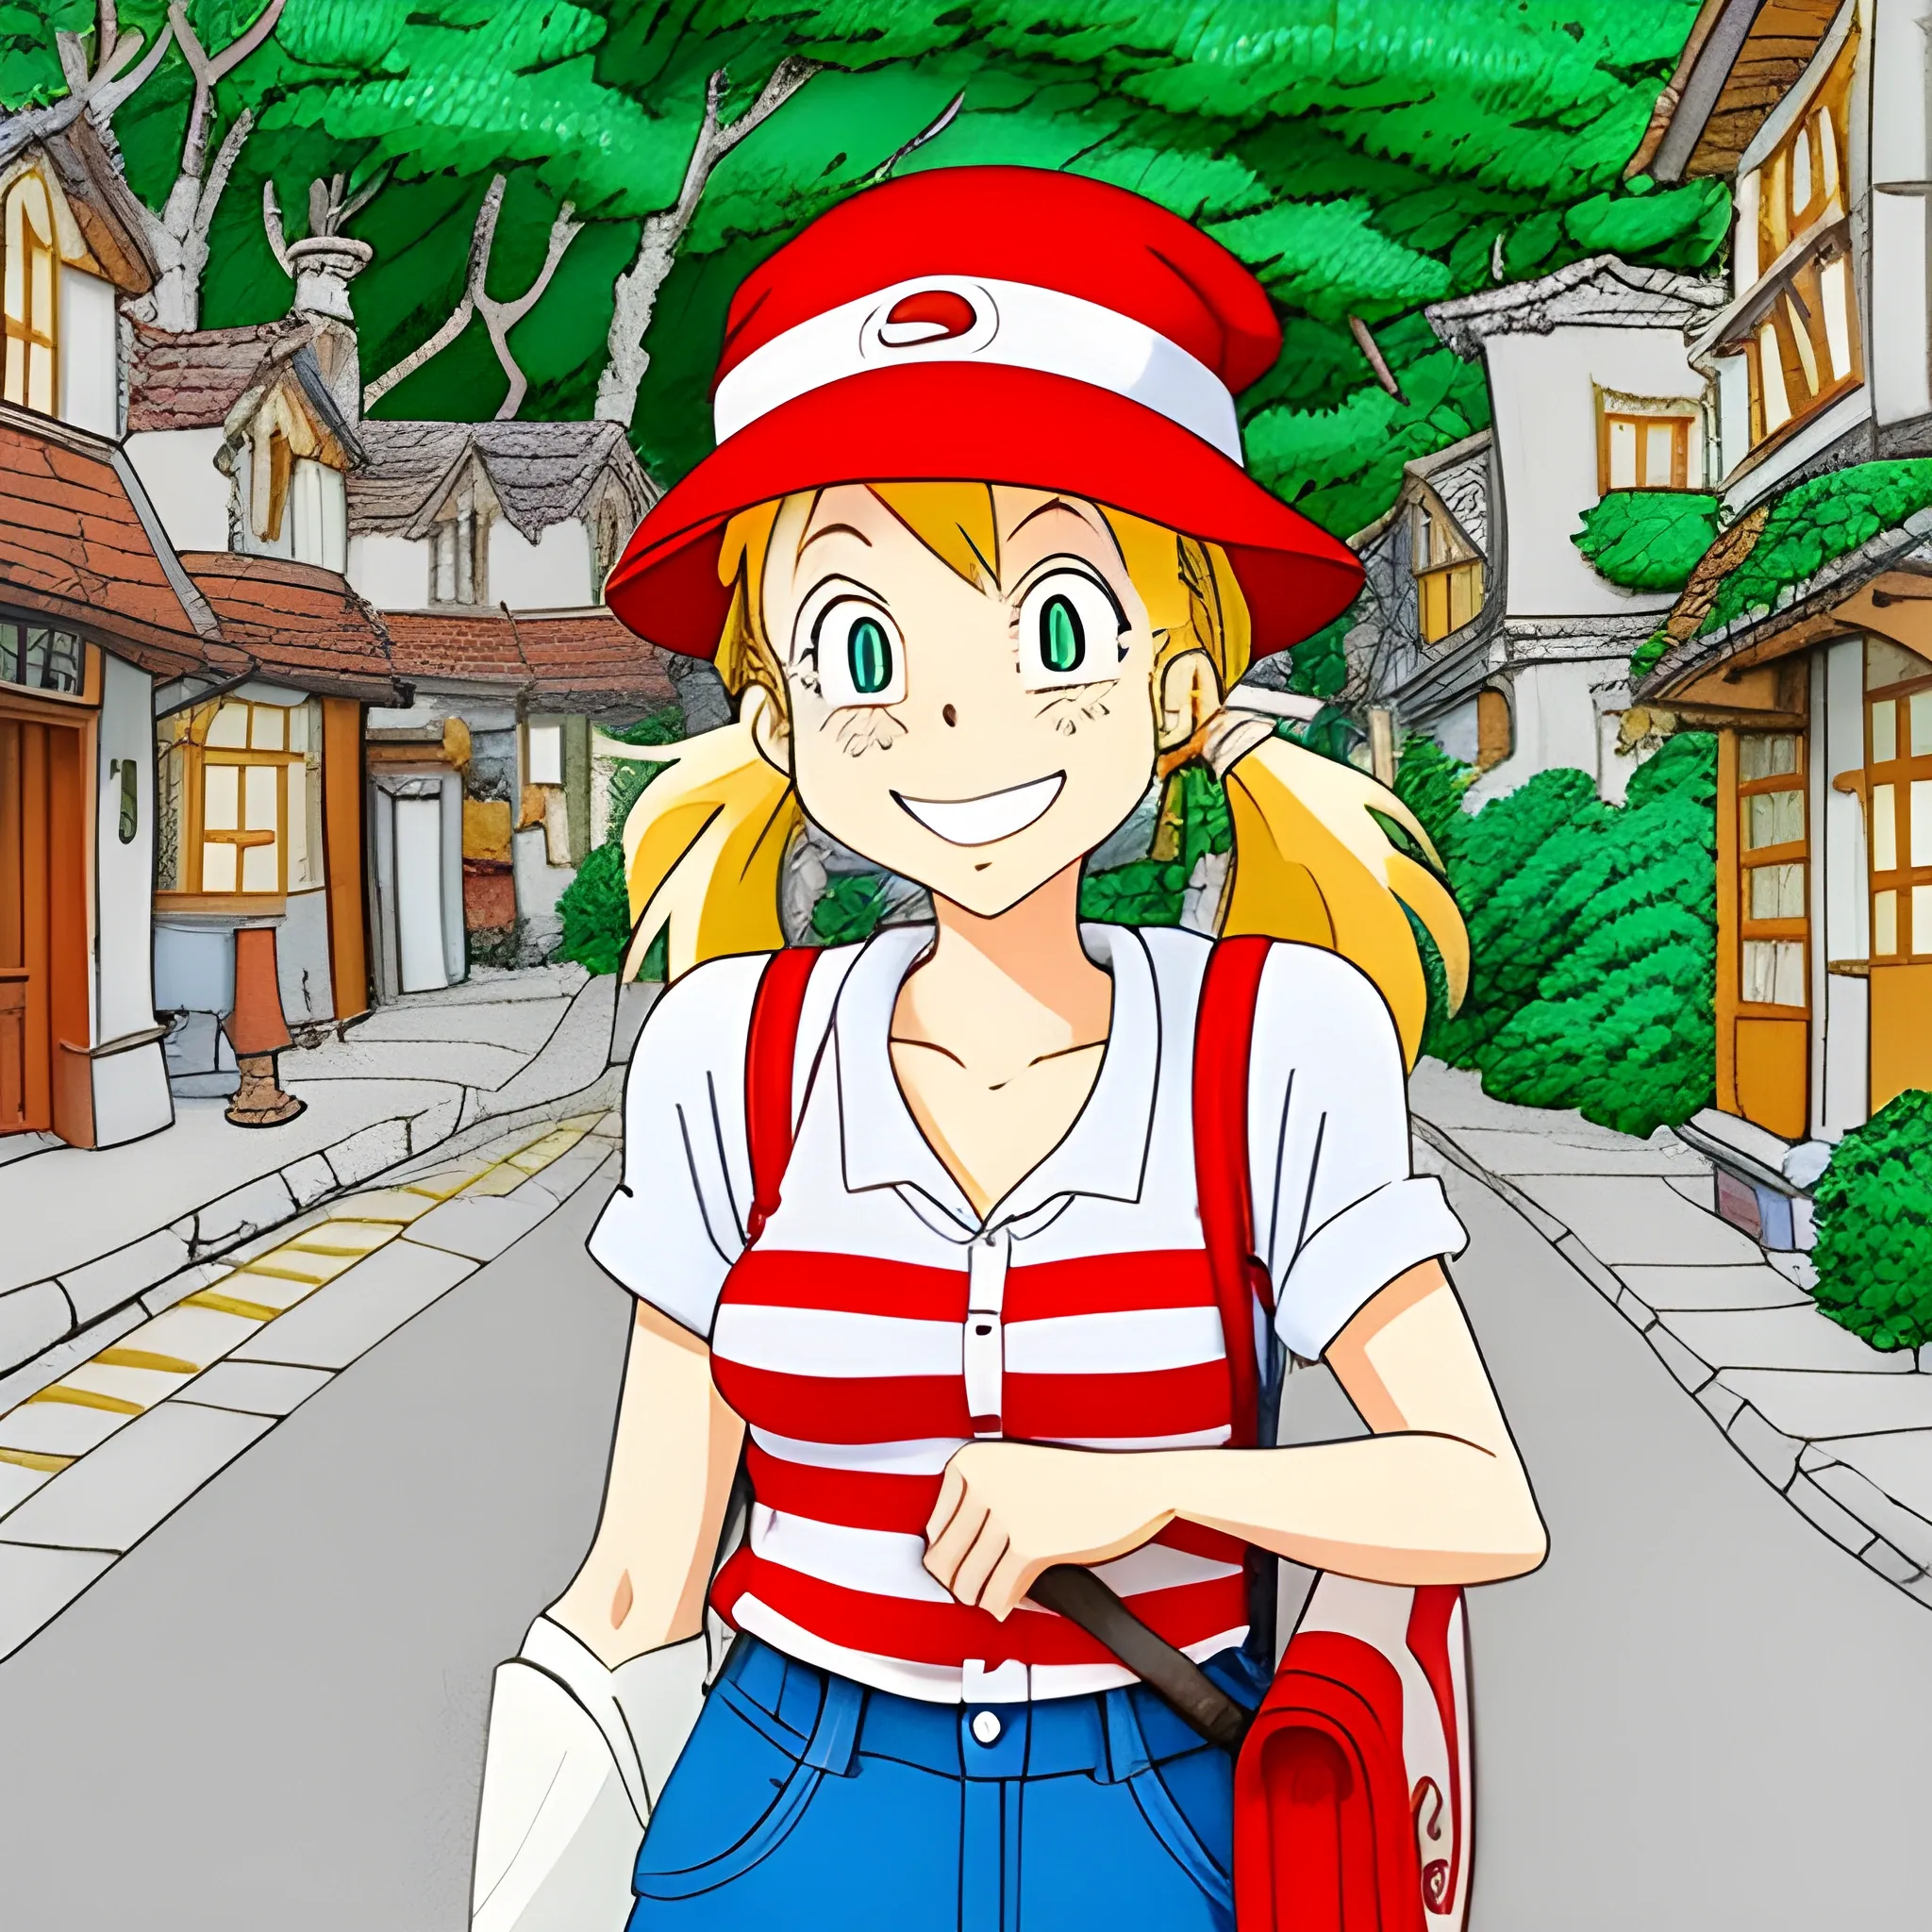 studio ghibli, where's waldo style,A very lively little girl named Keli has blonde hair and two ponytails. She runs around the village with a red schoolbag and a red hat every day, looking very happy and happy., Cartoon, Cartoon, Cartoon,five years old,little baby,butieaful big eye